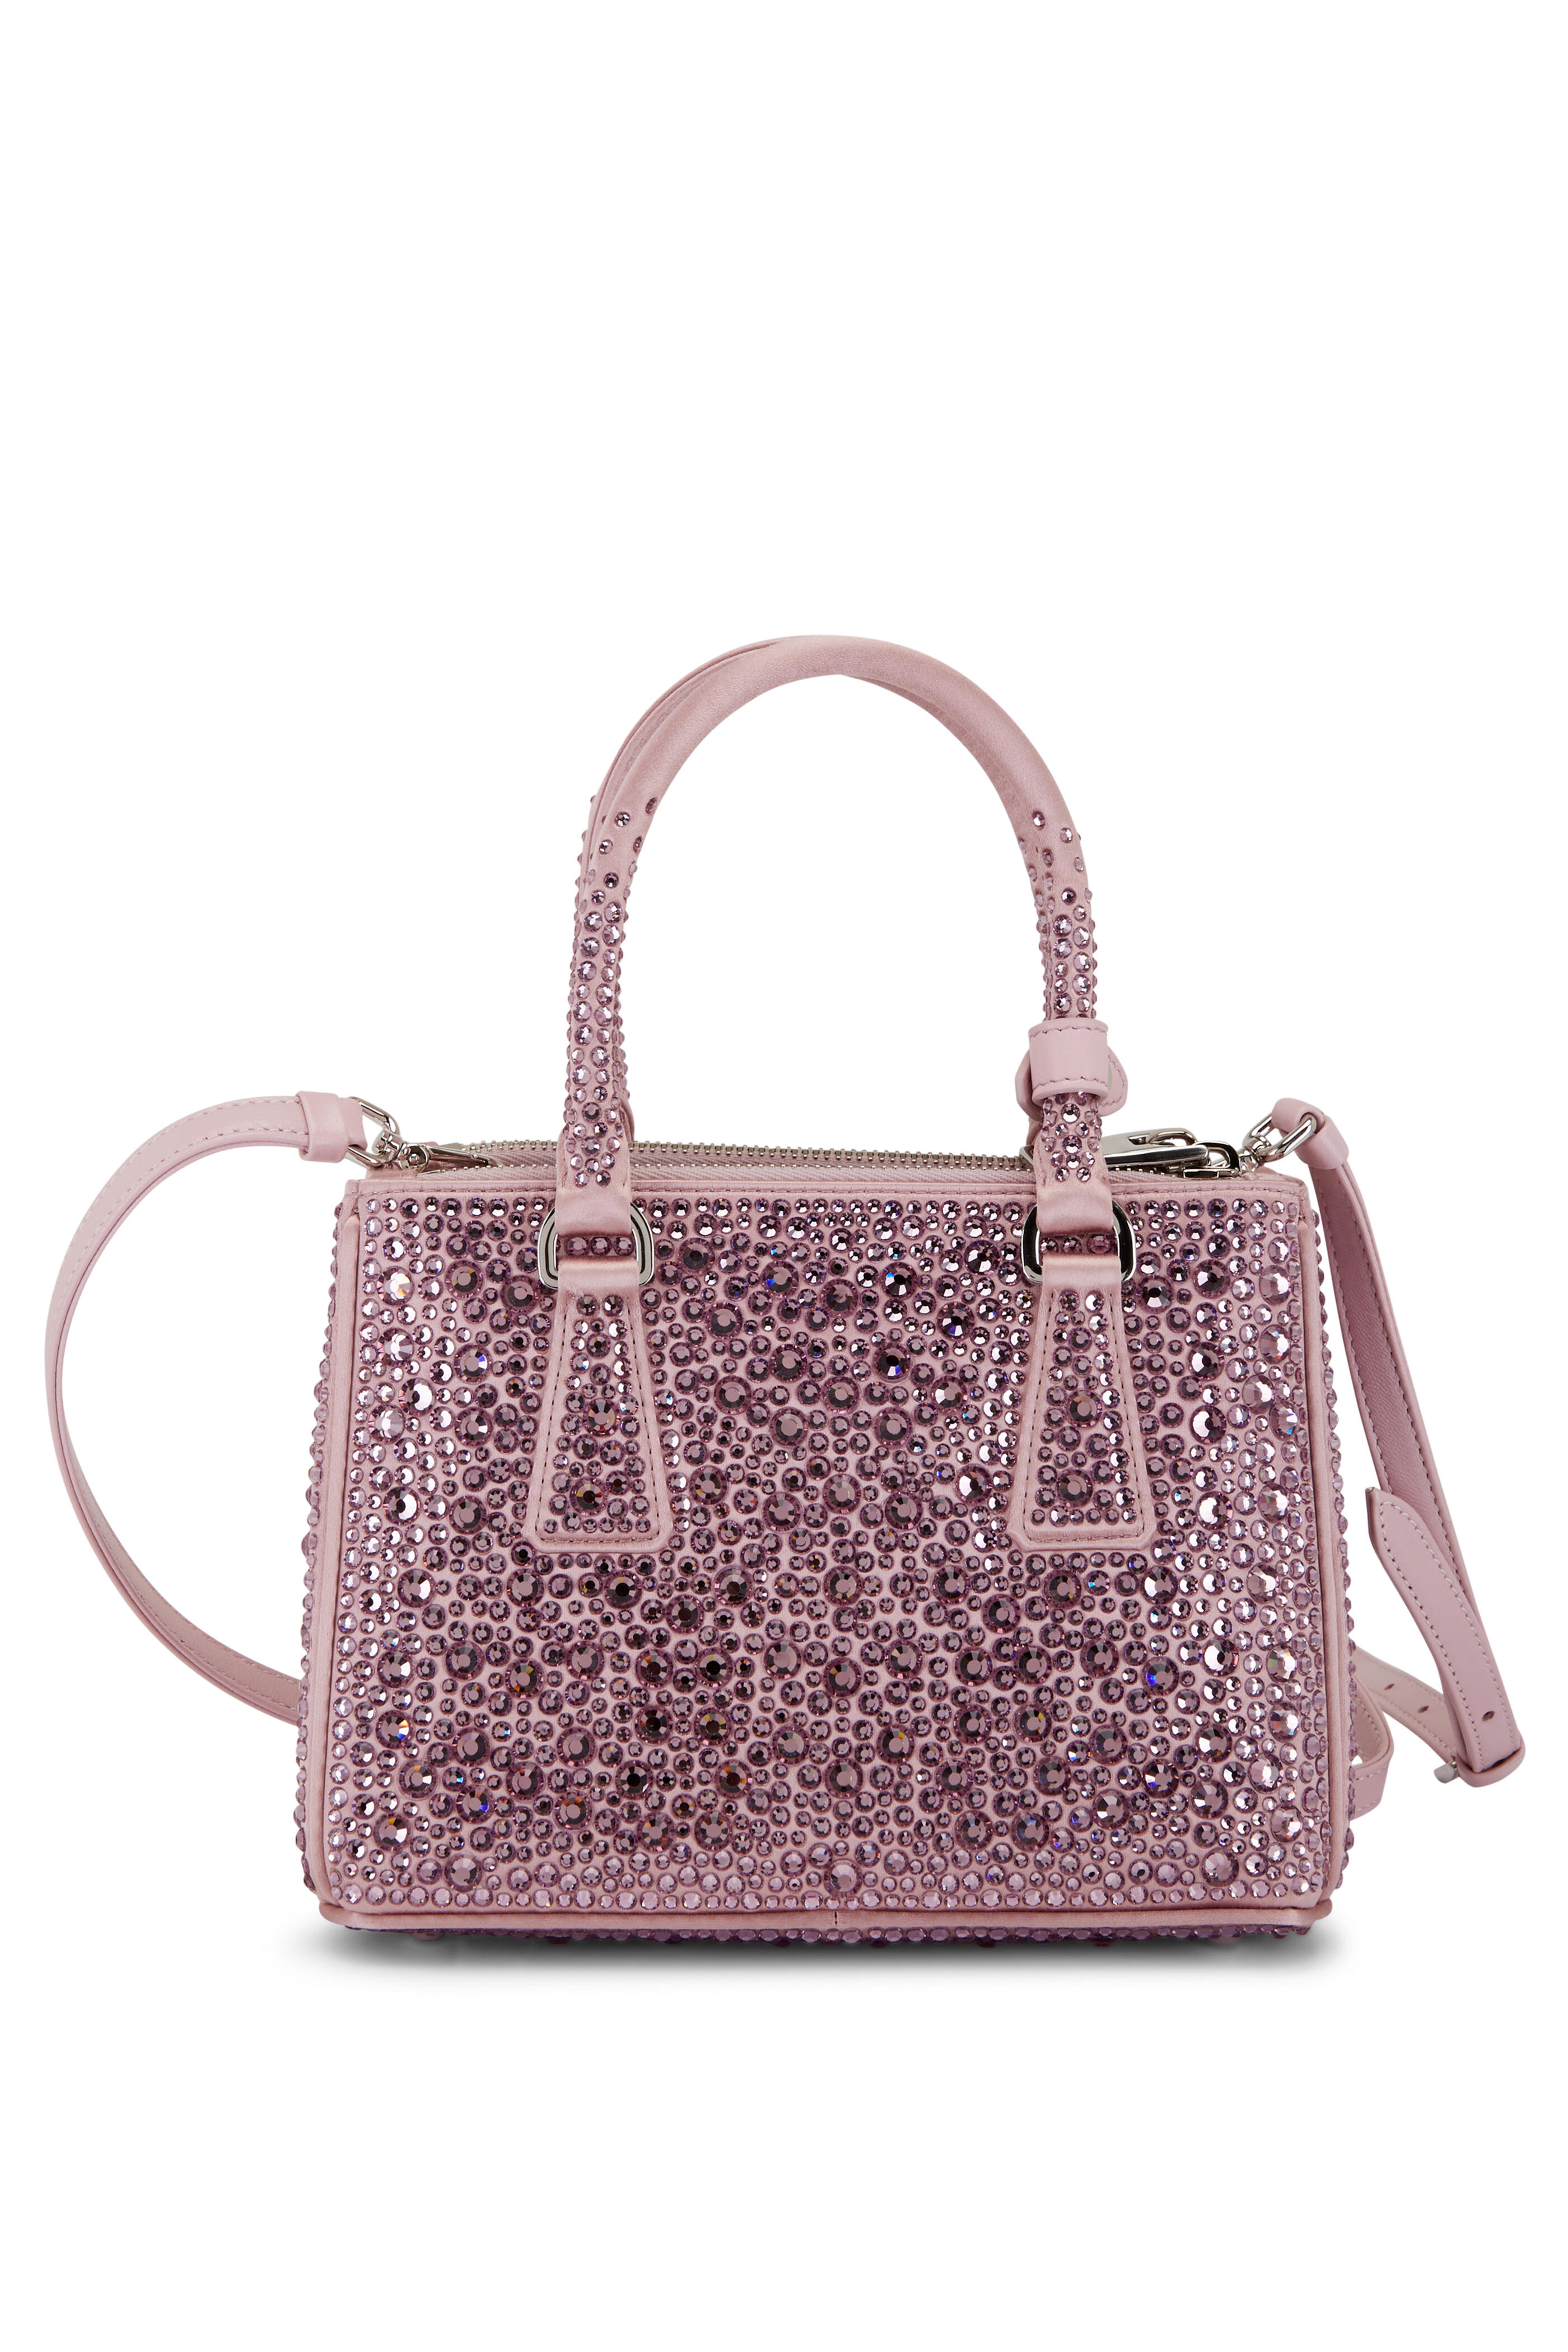 Prada Women's Pink Alabstro Galleria Crystal Small Satchel Bag | by Mitchell Stores